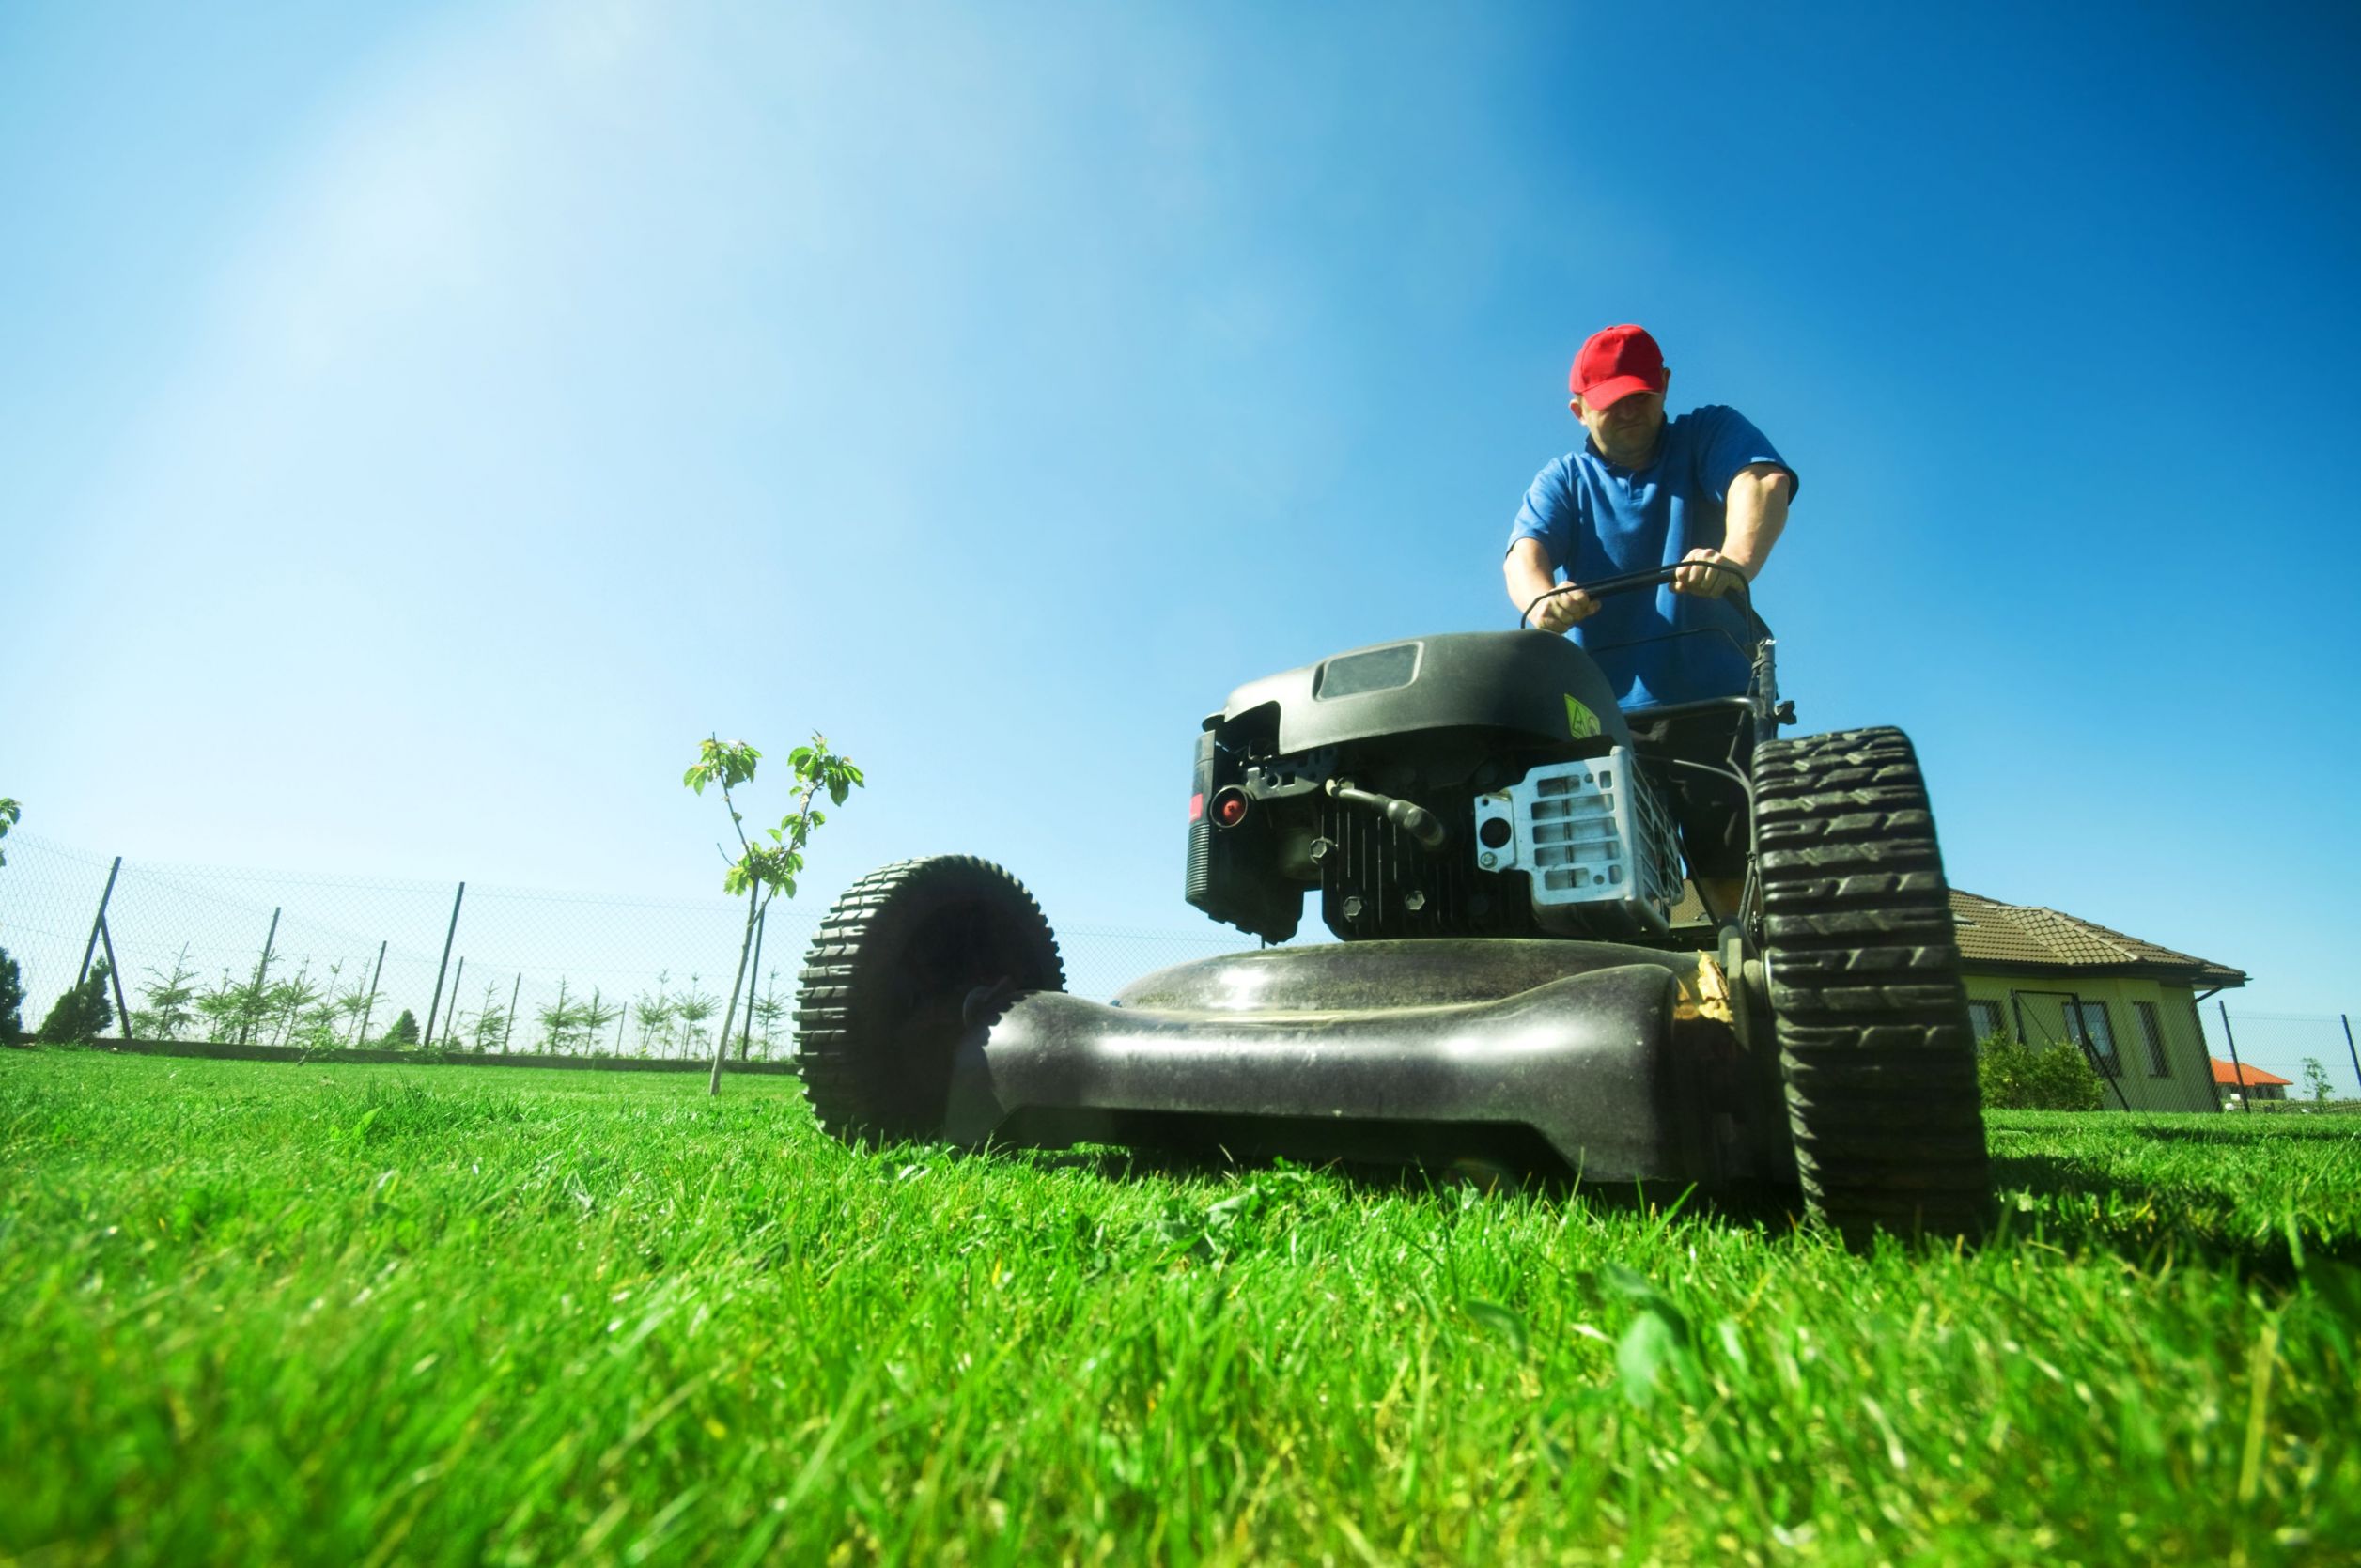 What To Expect When Hiring Lawn Installers In Ashburn, VA For Sod Placement